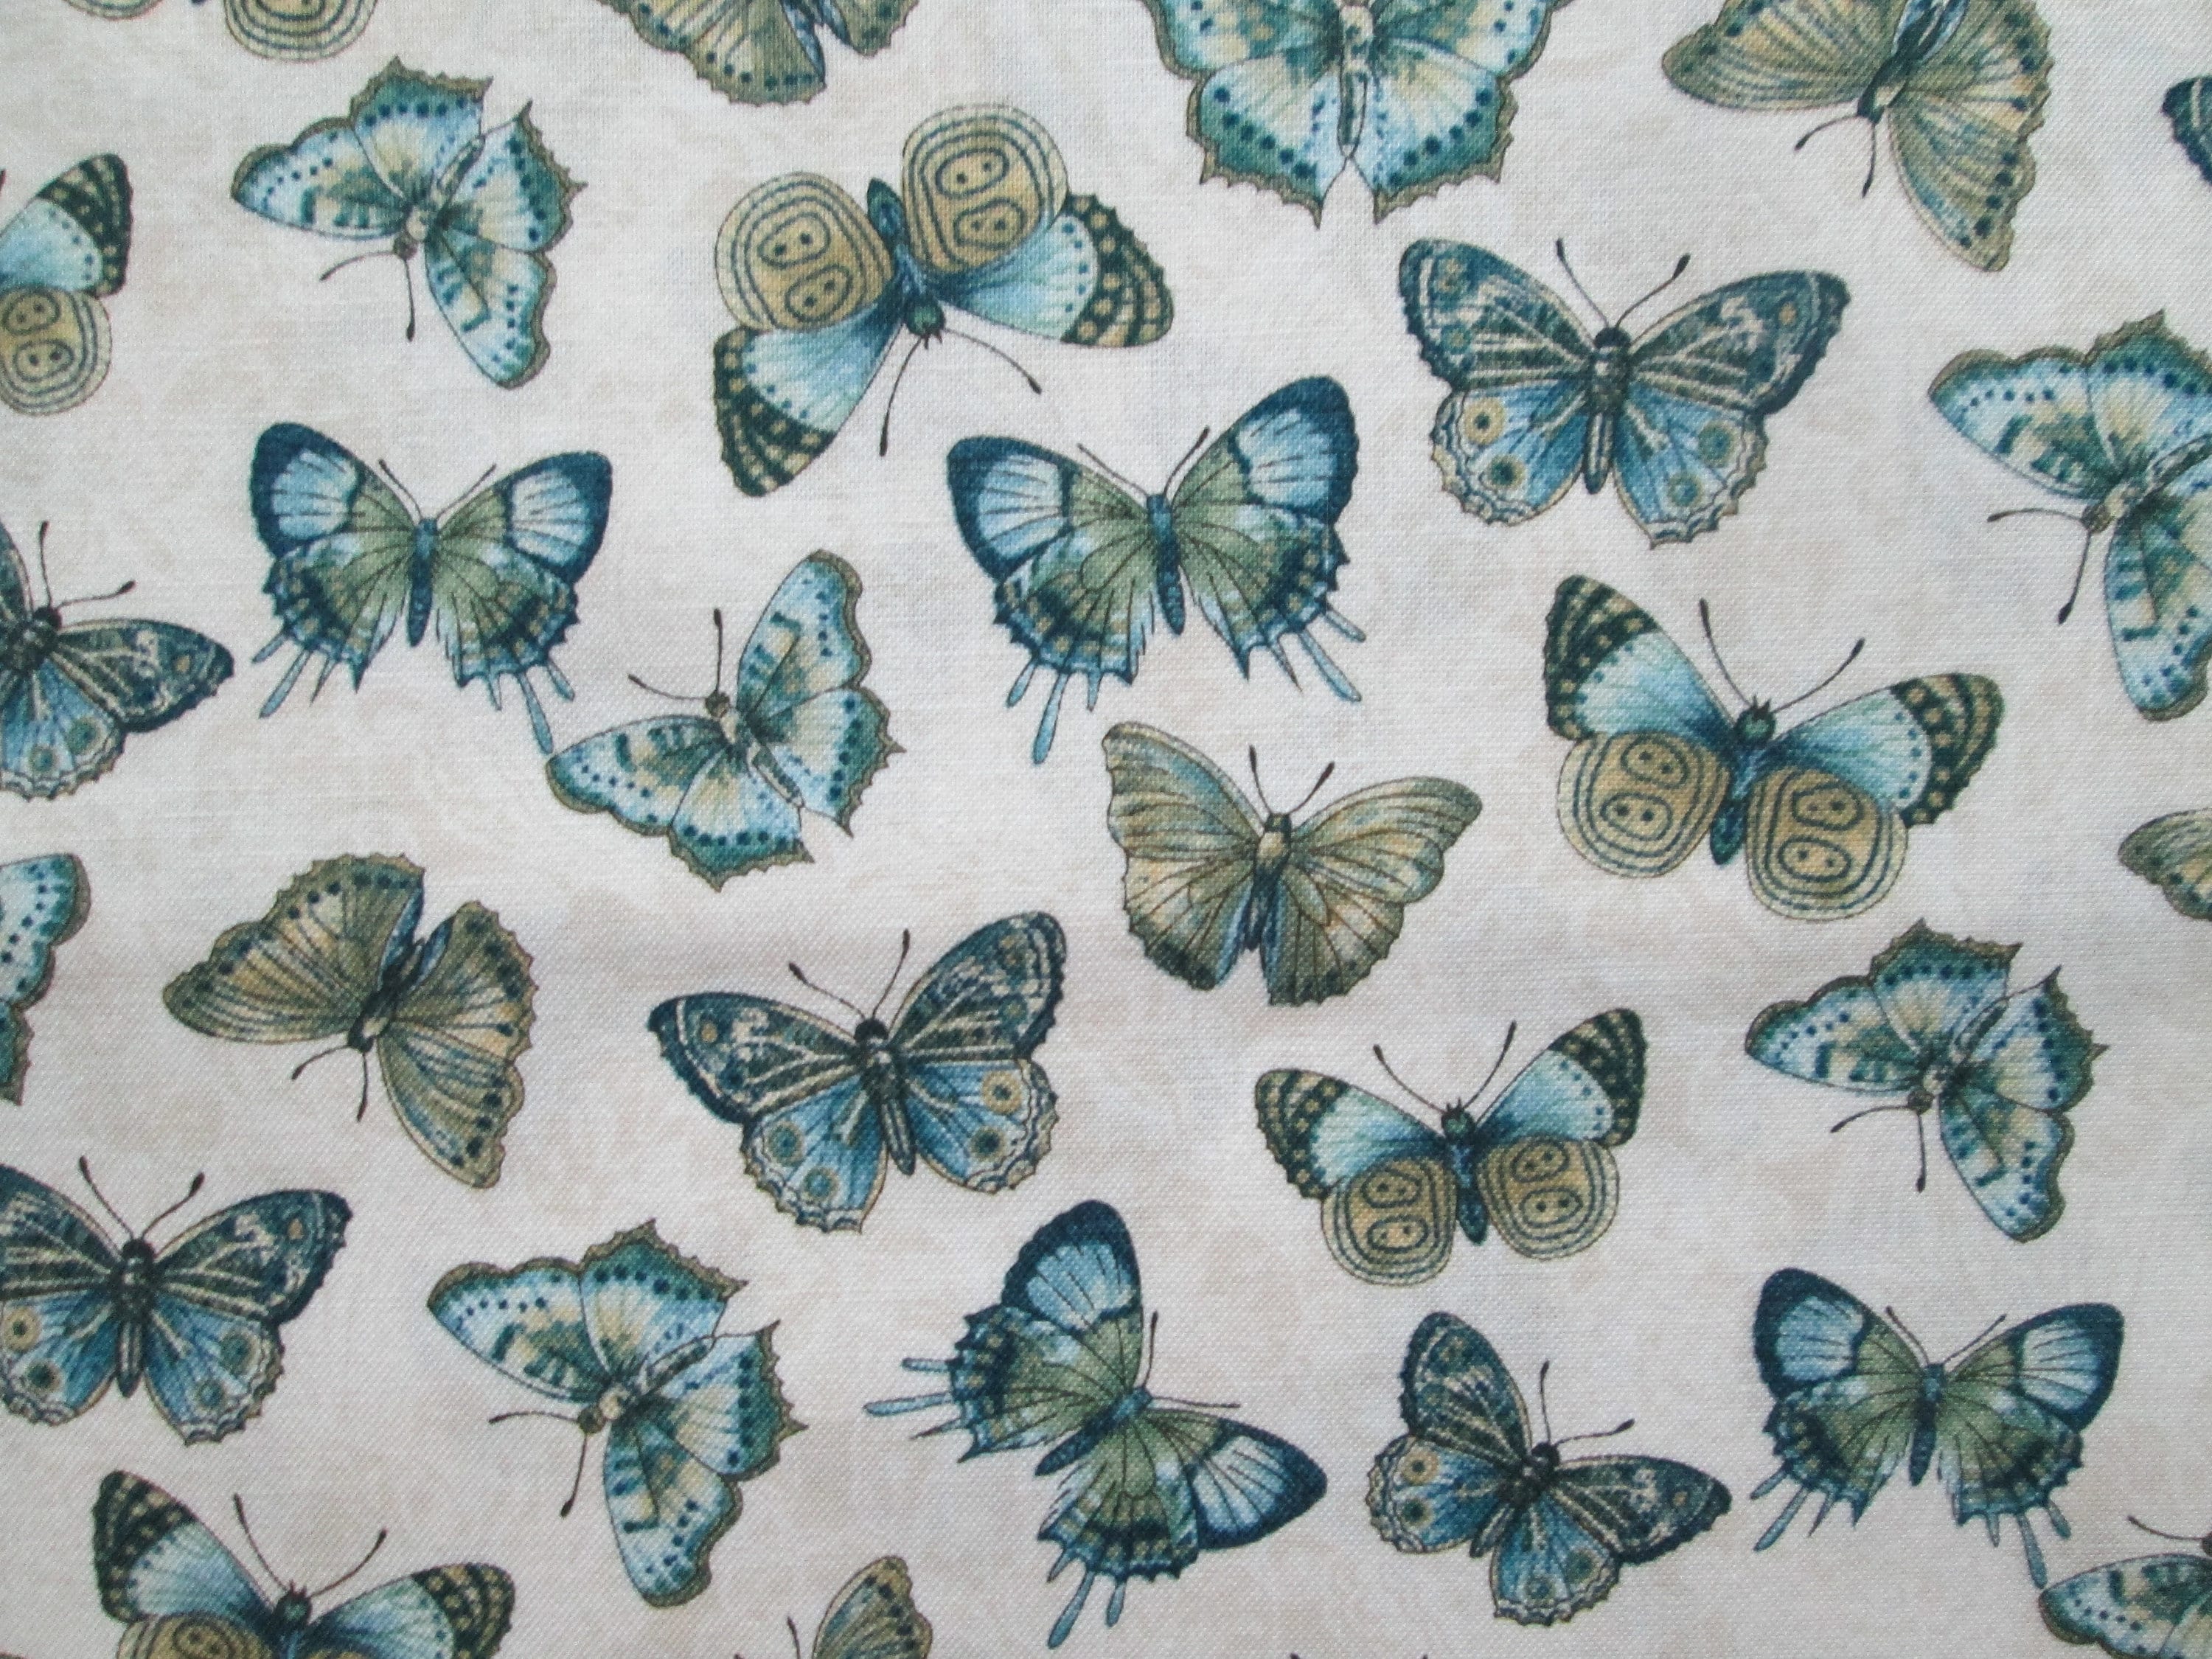 Realistic Buttefly Butterflies Blue Green Off White Cotton | Etsy